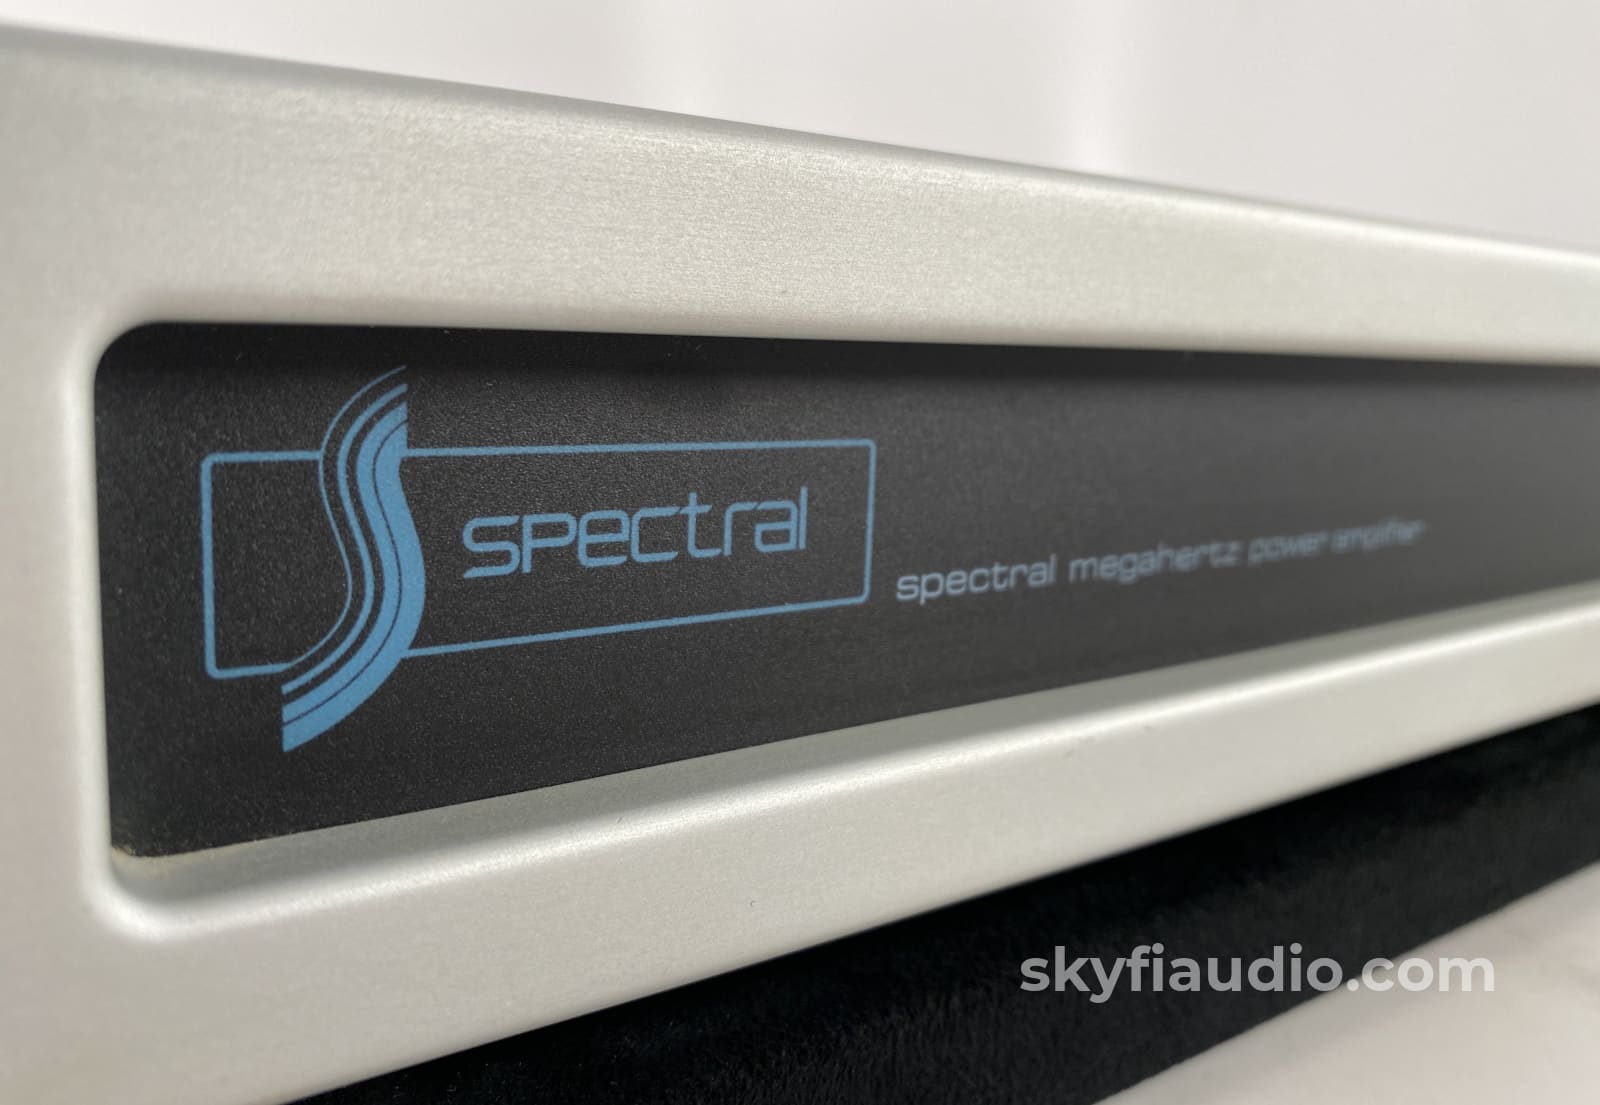 Spectra Dma-90 High Resolution Amplifier Complete And Like New Set